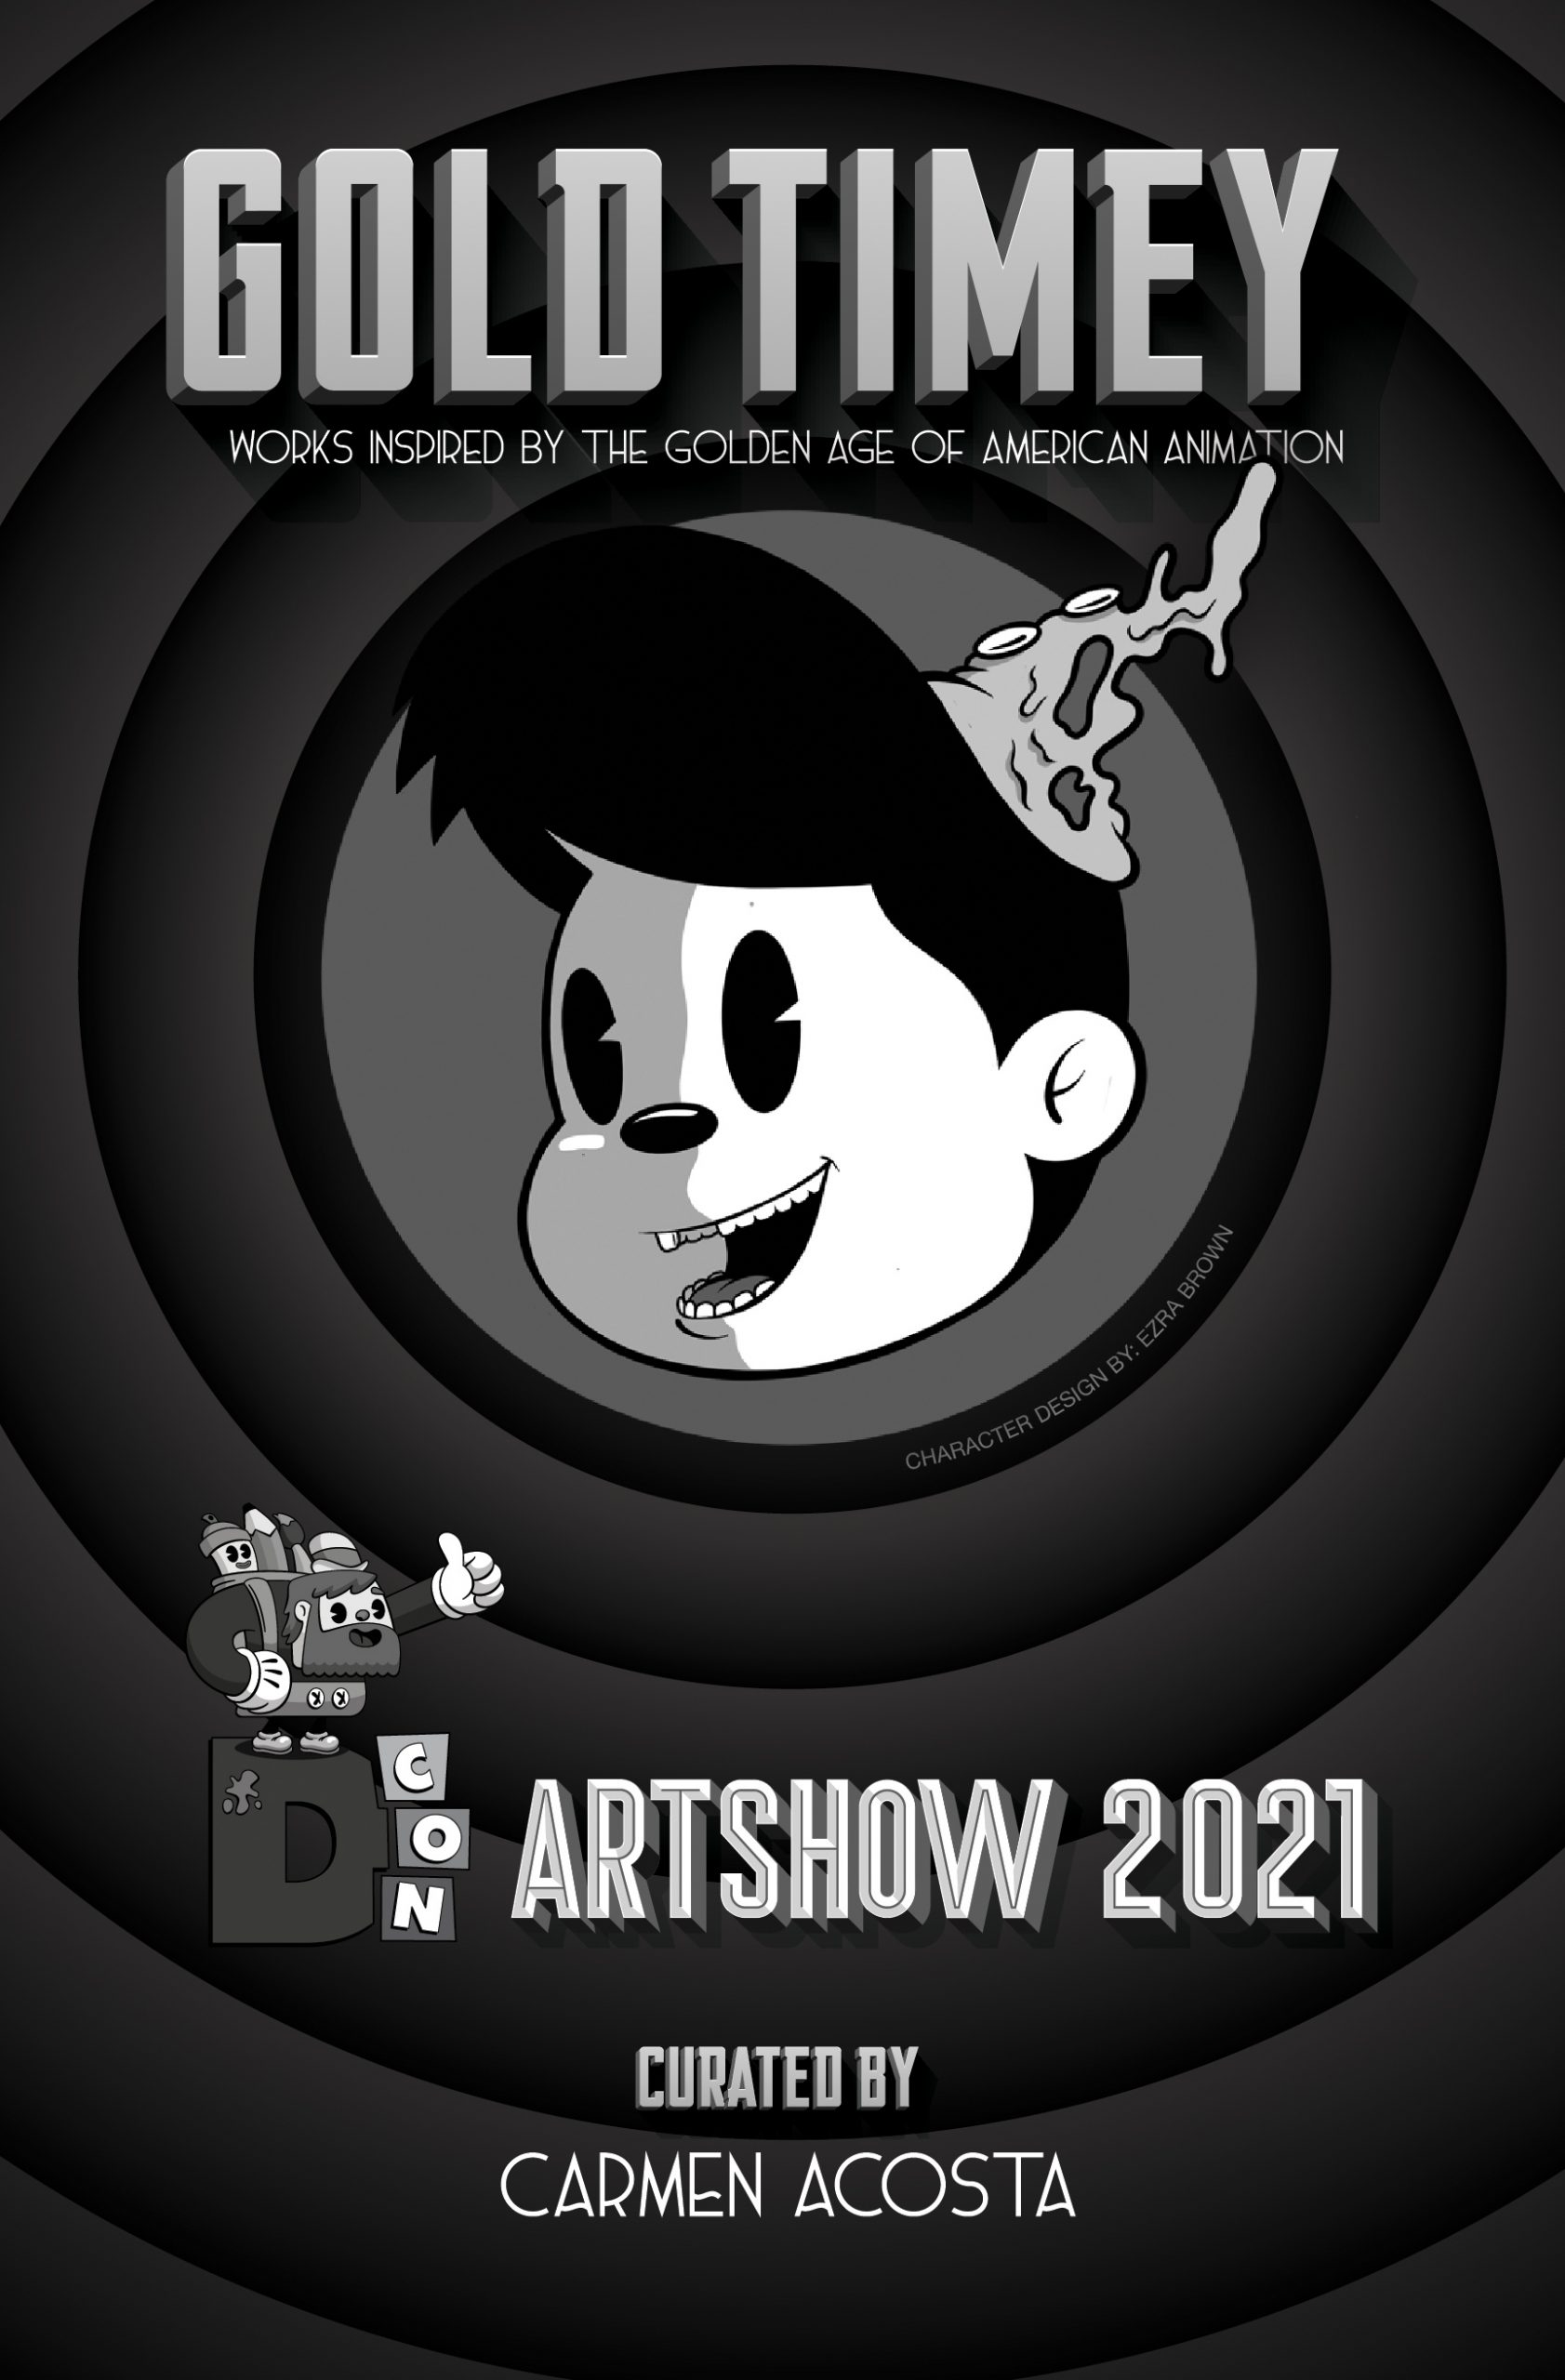 Old Timey Art Show at DCON 2021